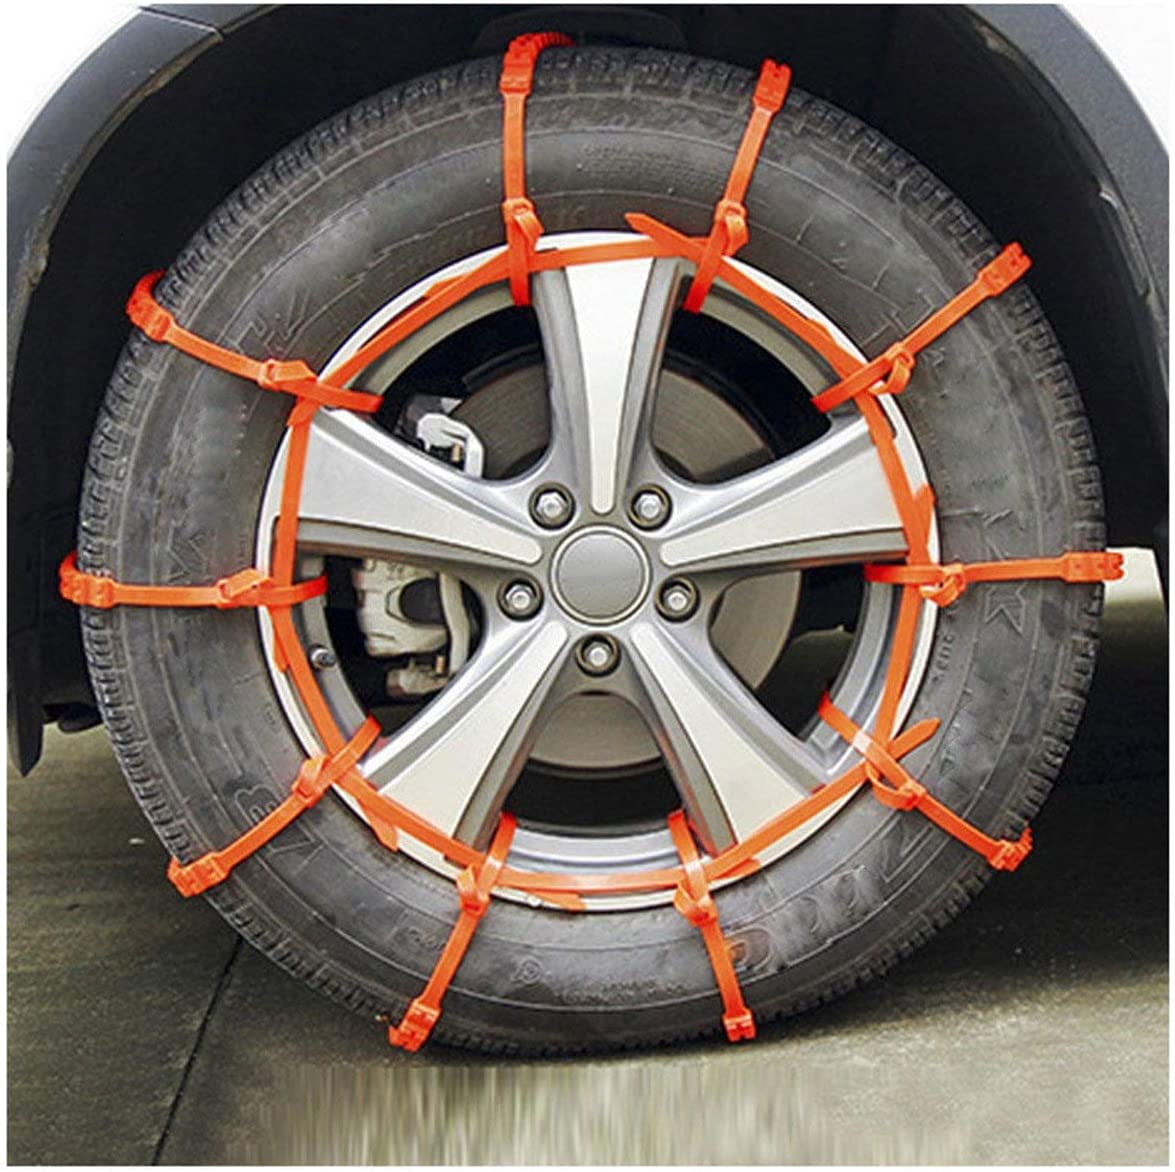 8 PCS Snow Tire Chain Adjustable for Car Truck SUV Anti-Skid Emergency Driving 